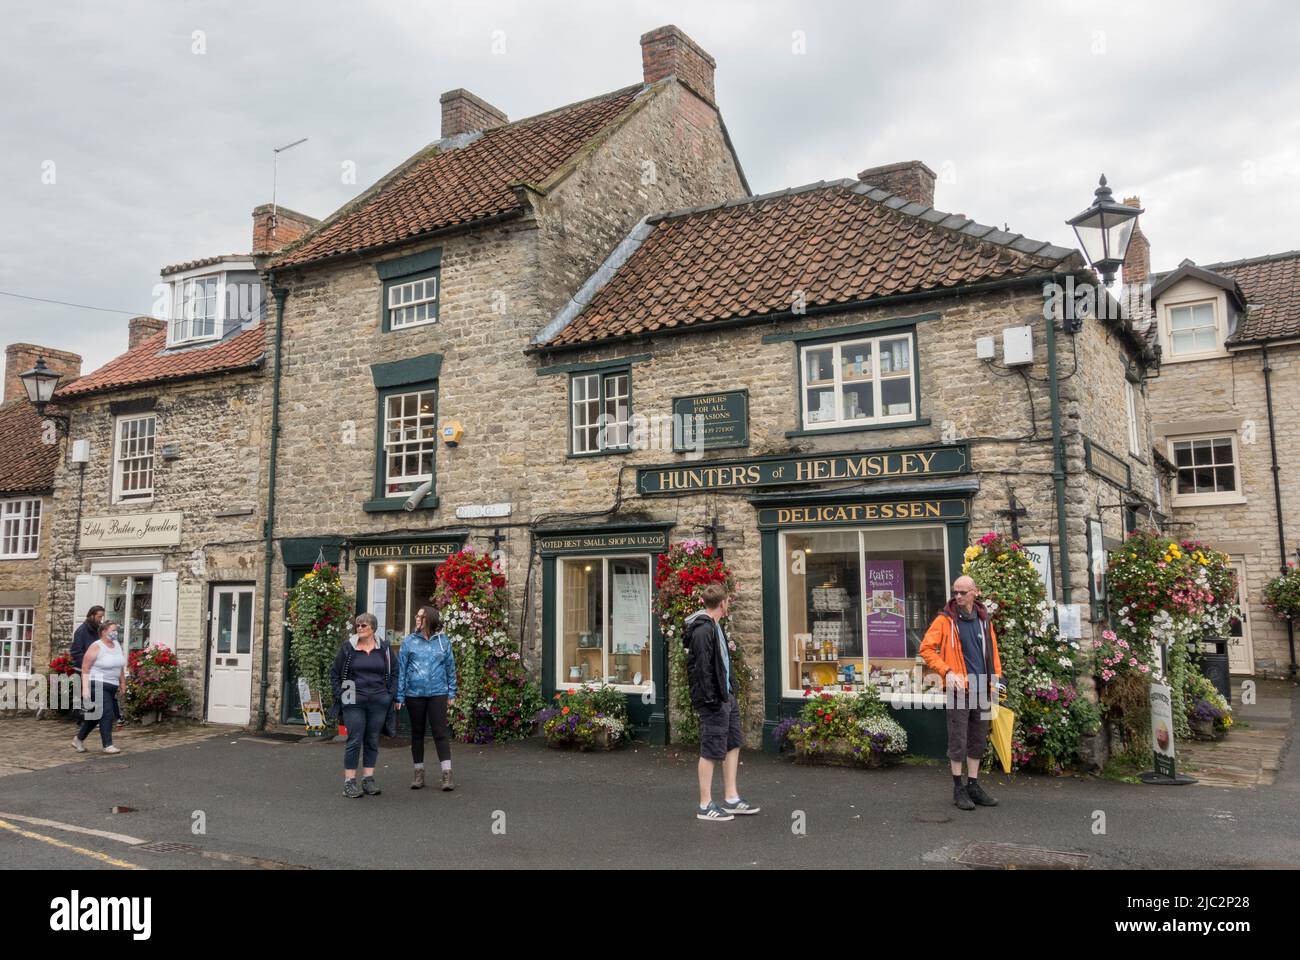 Hunters of Helmsley, voted best small shop 2015, a friendly, family-run deli in Helmsley, a market town in Ryedale, North Yorkshire, England. Stock Photo